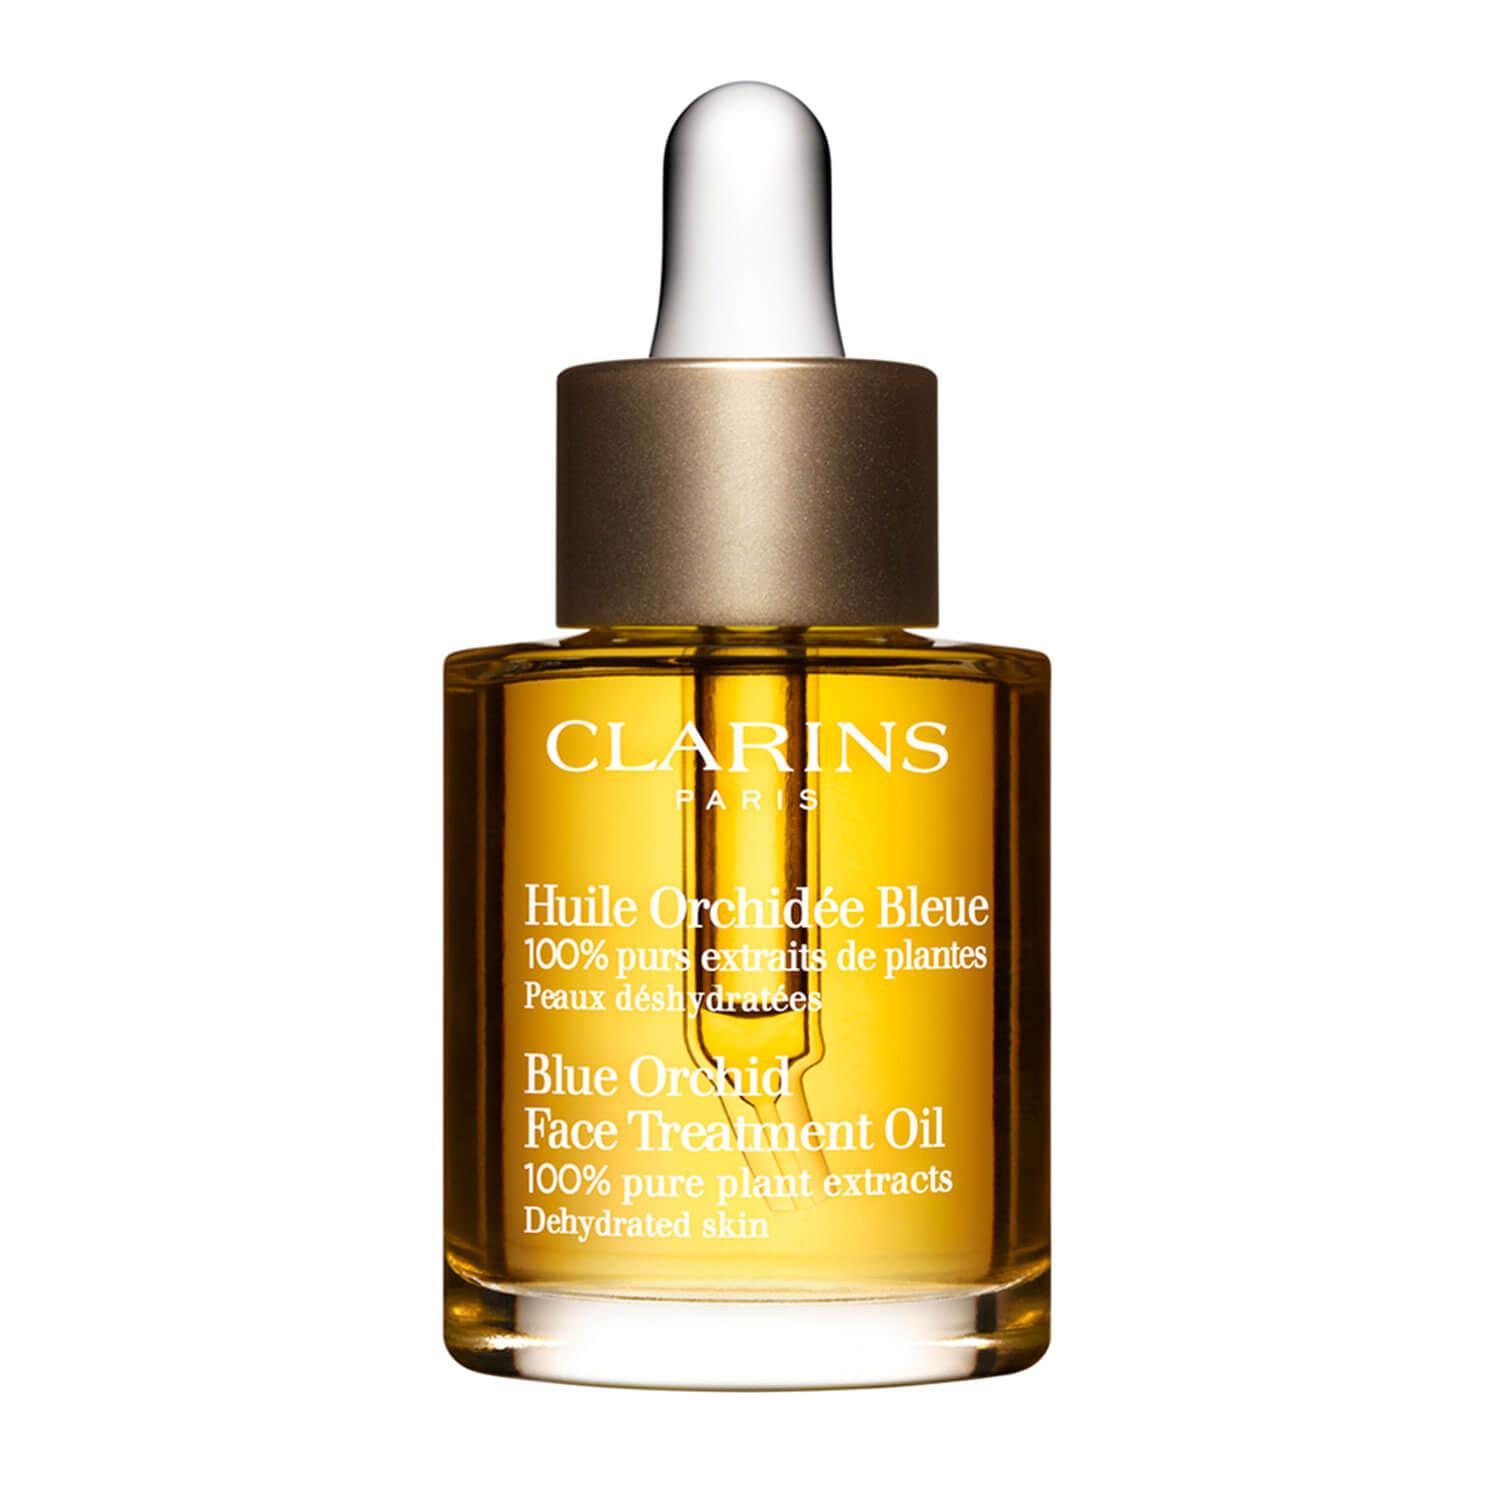 Clarins Skin - Blue Orchid Treatment Oil